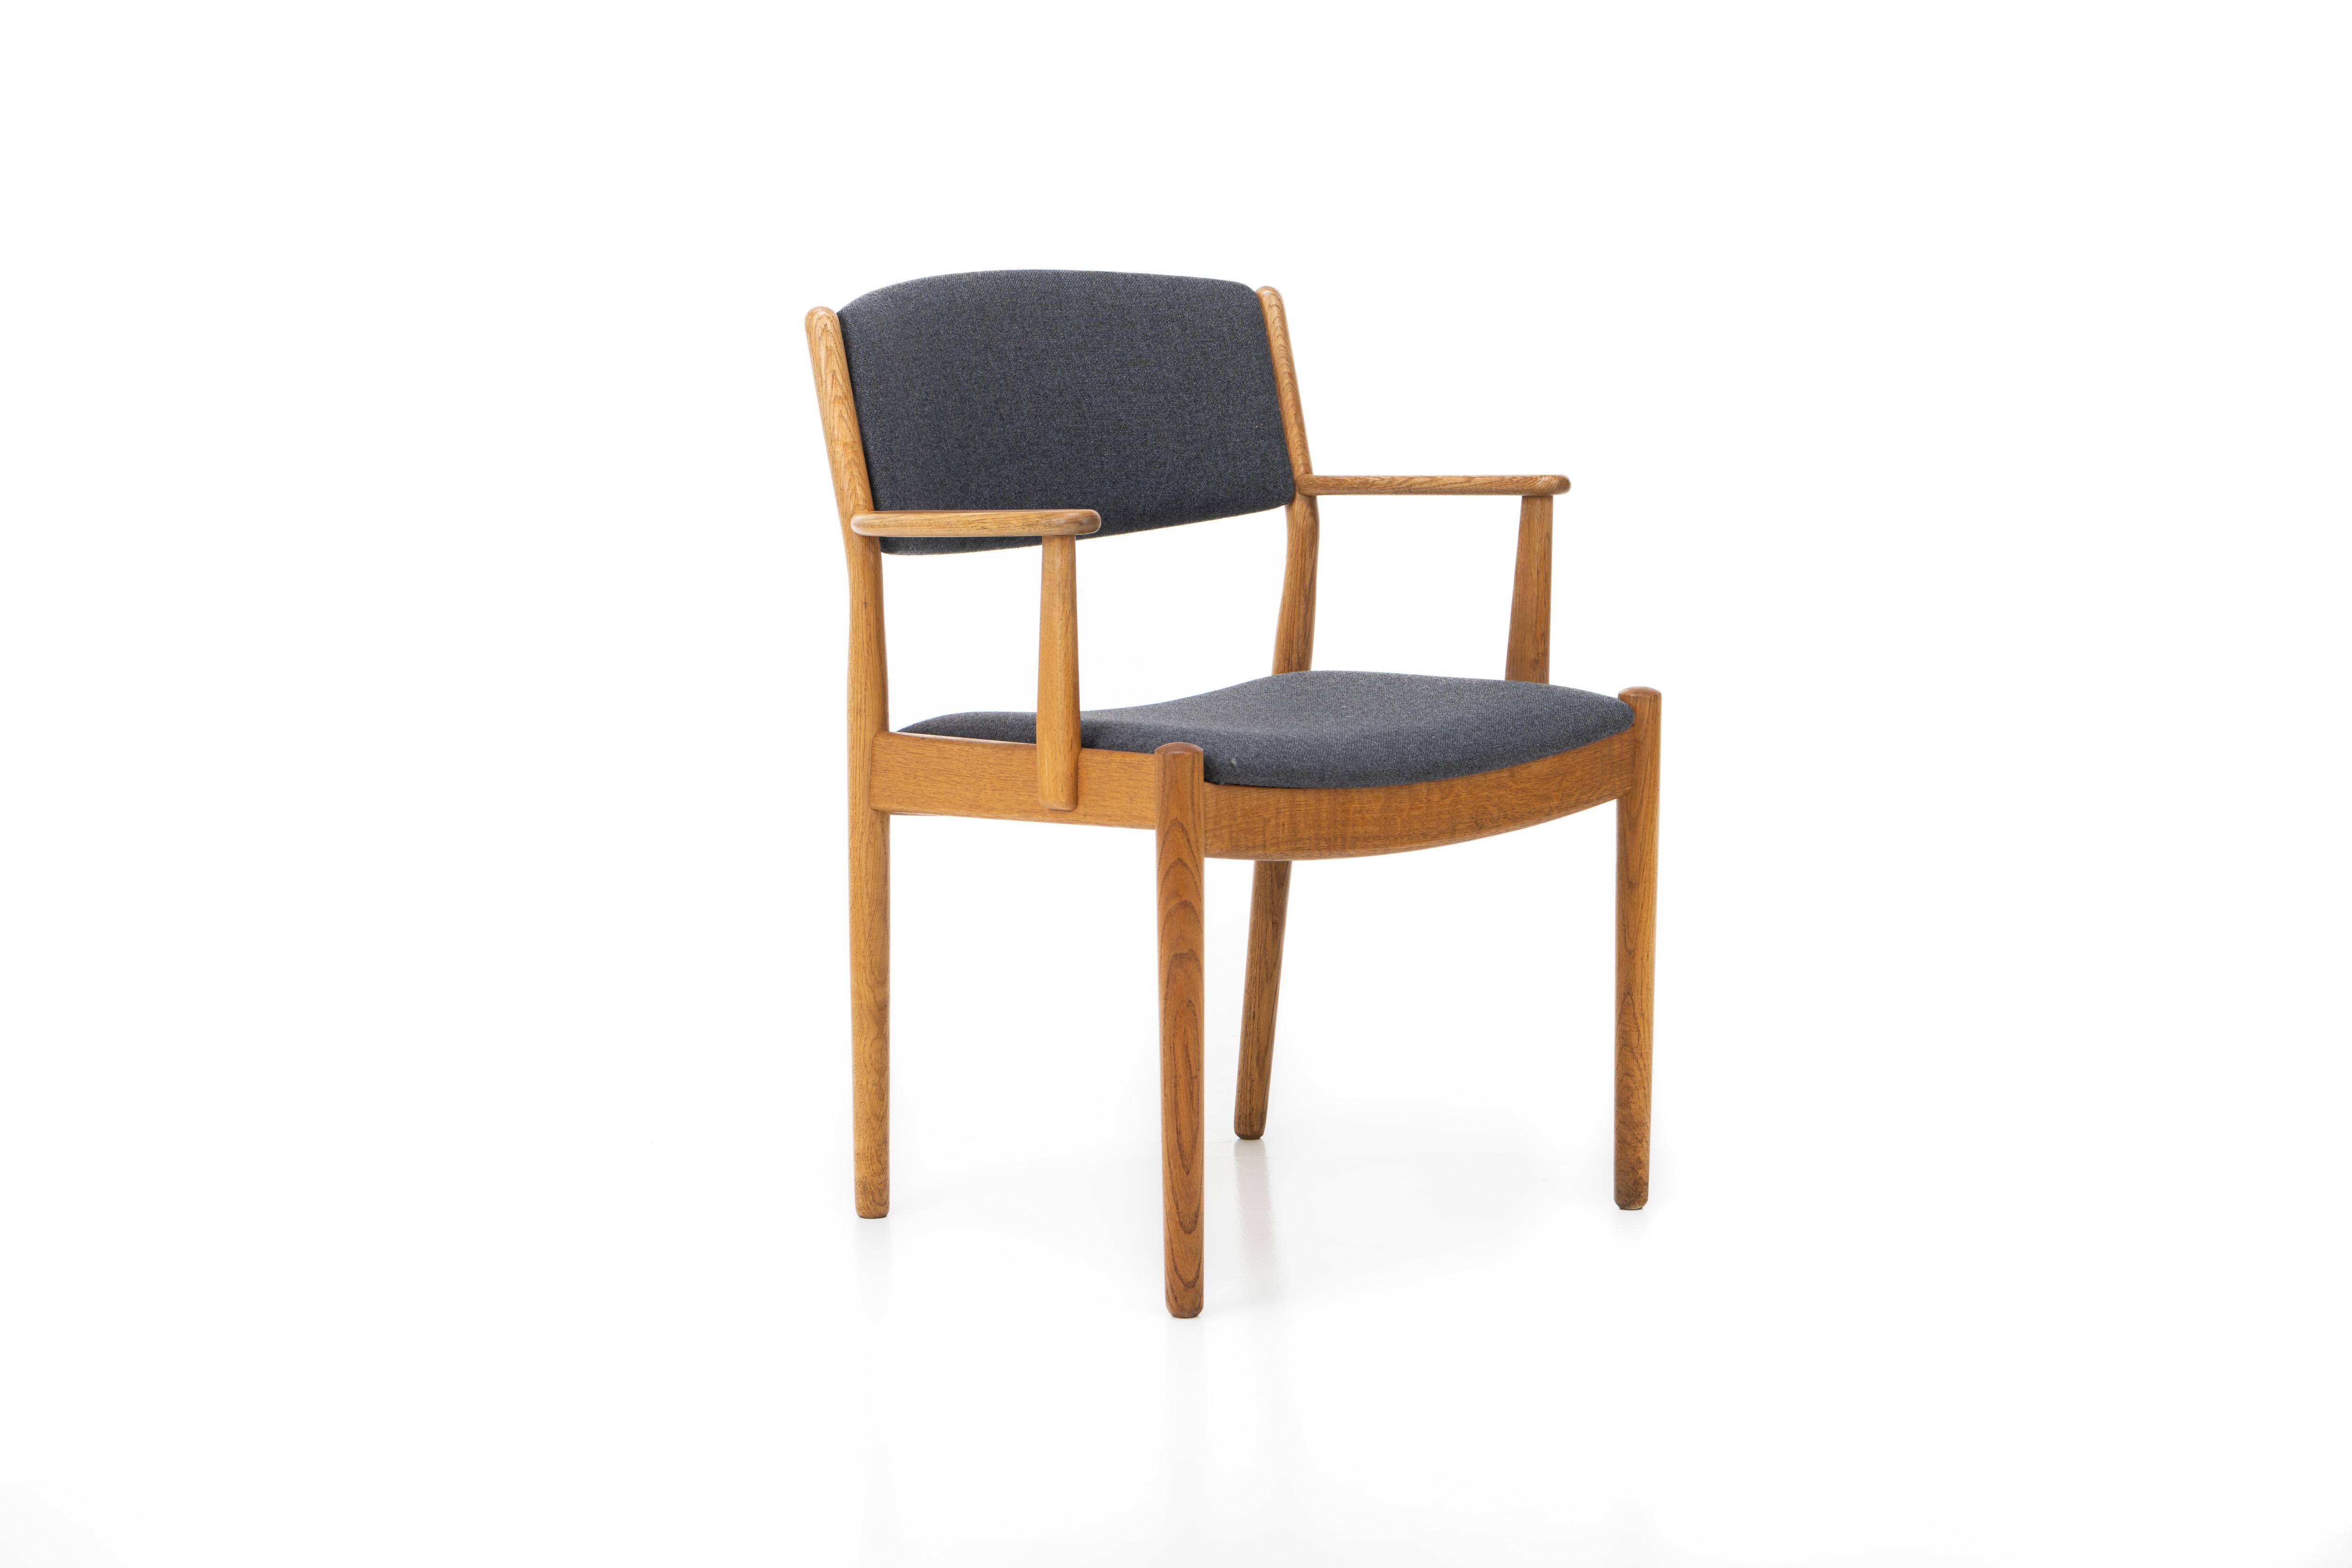 Danish Dining Chairs with Armrests by Poul Volther for FDB Møbler, Denmark, 1960 For Sale 4